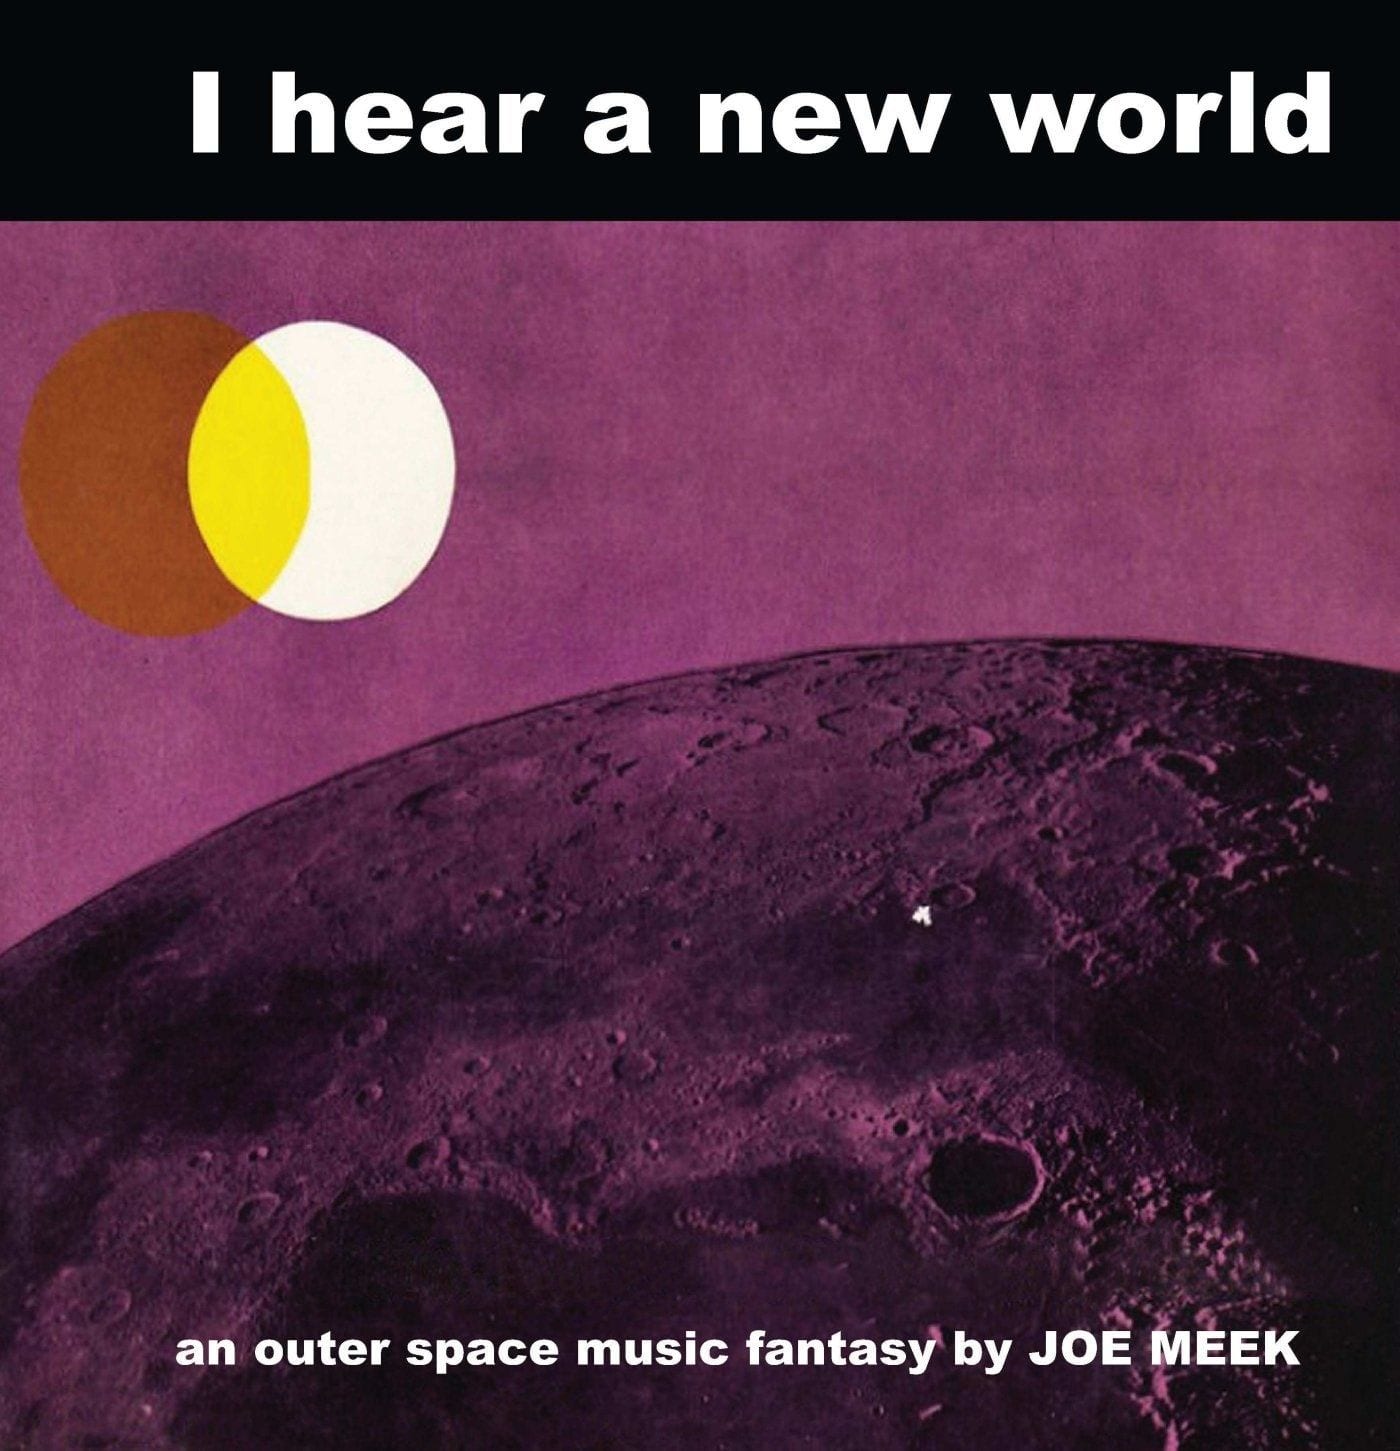 At 60 Years Distance, Joe Meek’s ‘I Hear a New World’ Still Sounds Unique